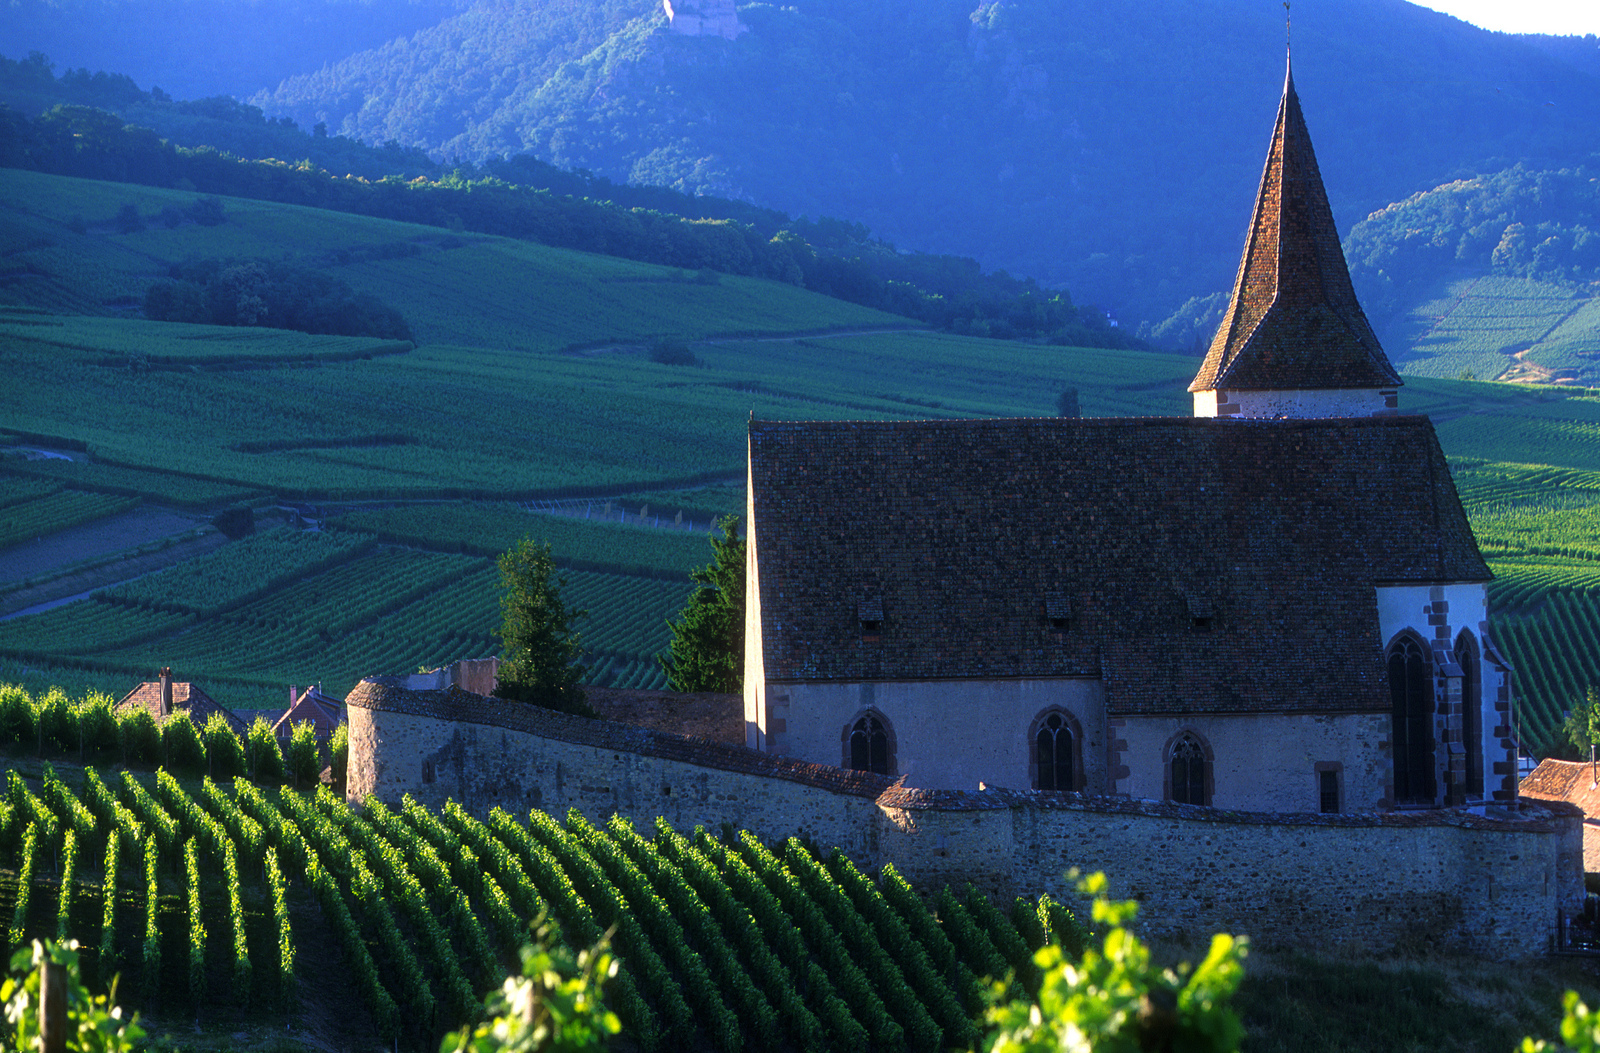 Alsace Wine Route from Strasbourg to Colmar